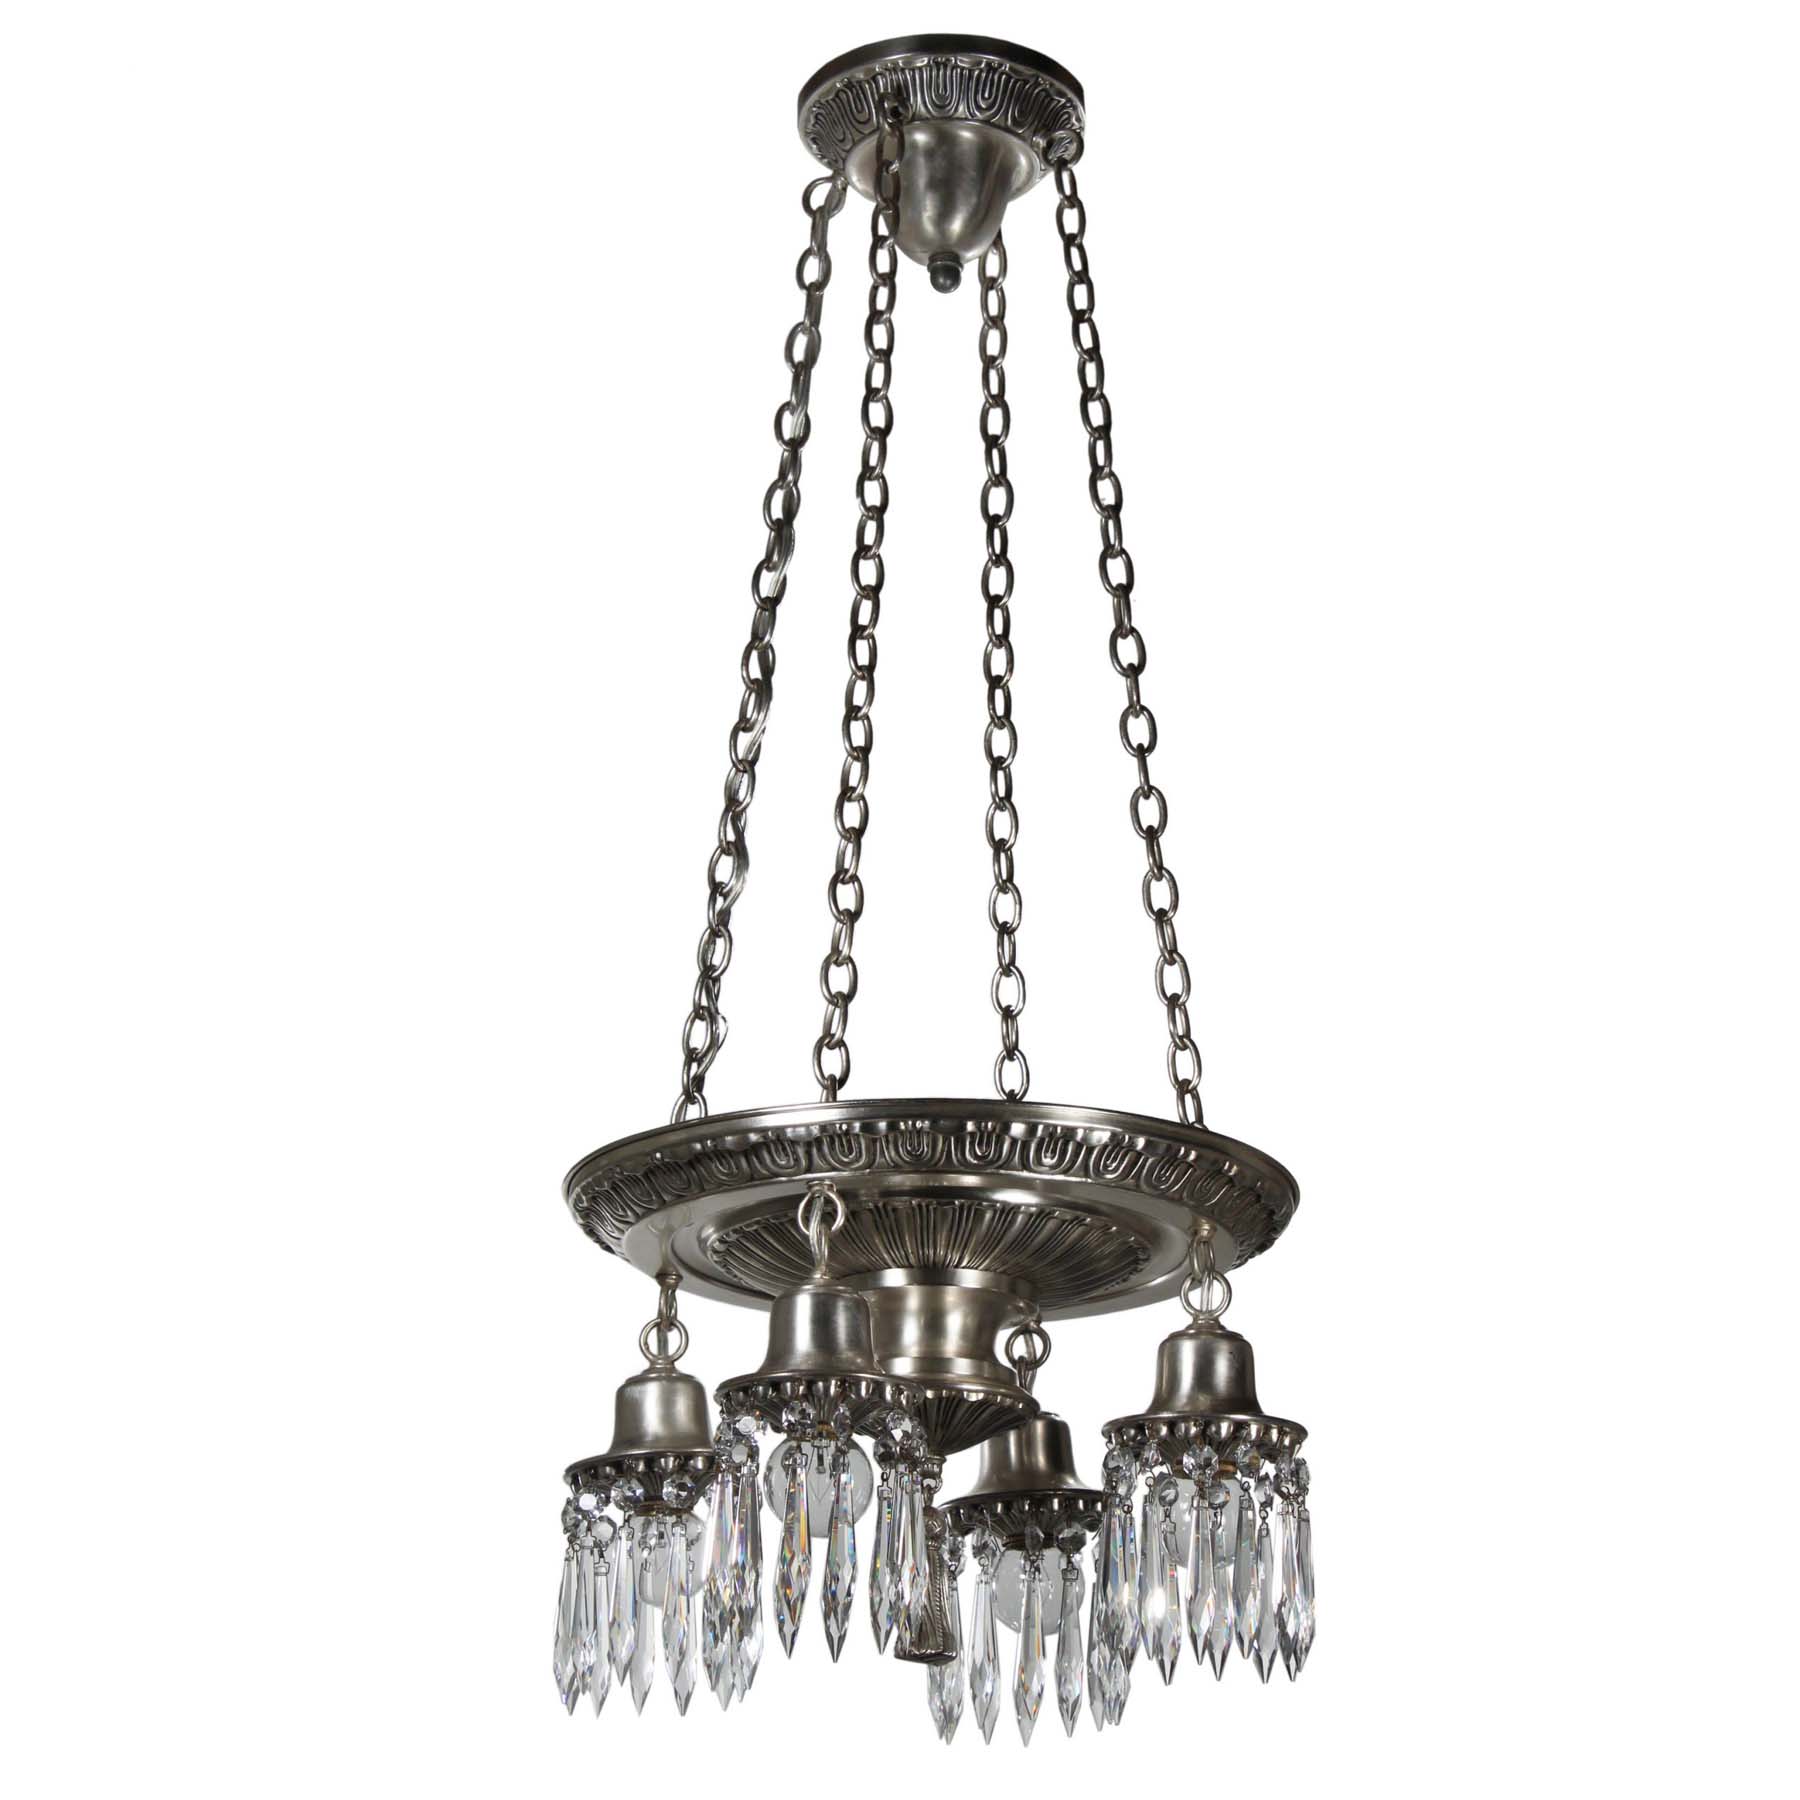 SOLD Neoclassical Silver Plated Chandelier with Prisms, Antique Lighting-69785